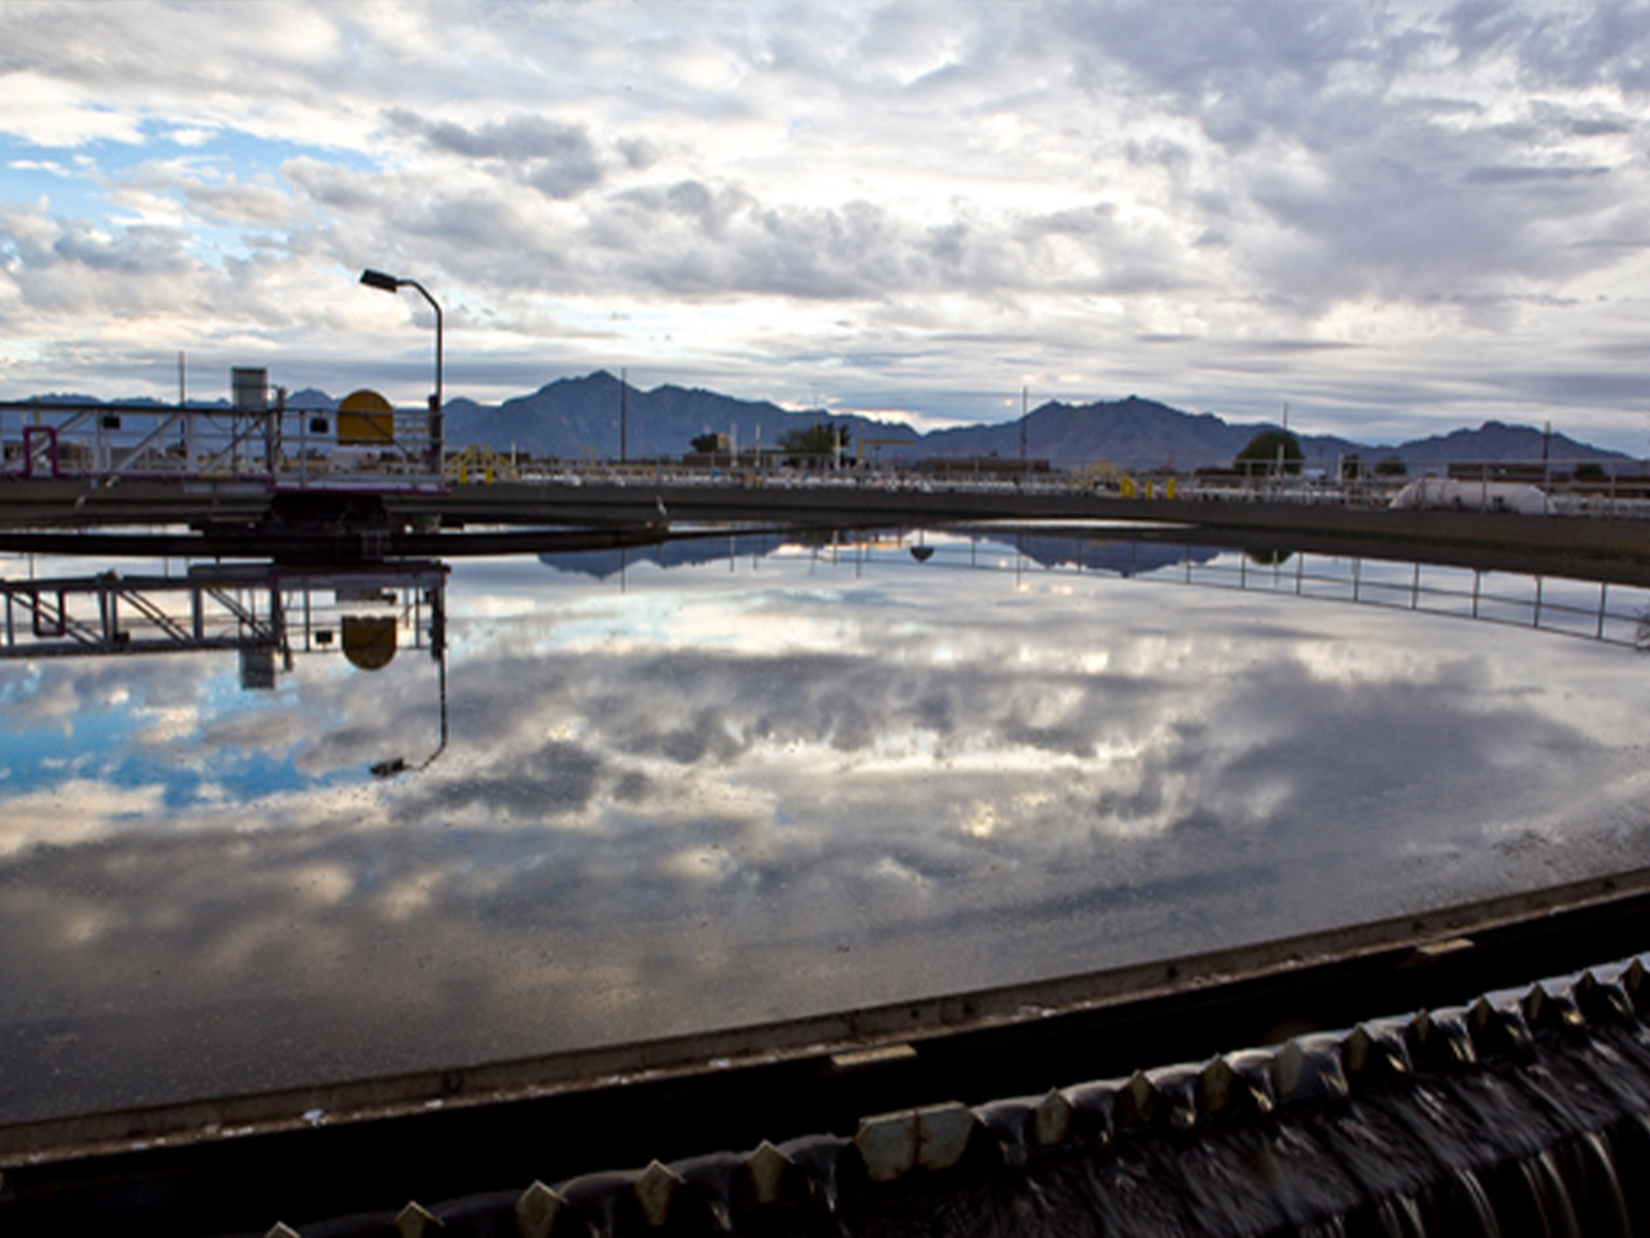 city of phoenix water services plu inspection